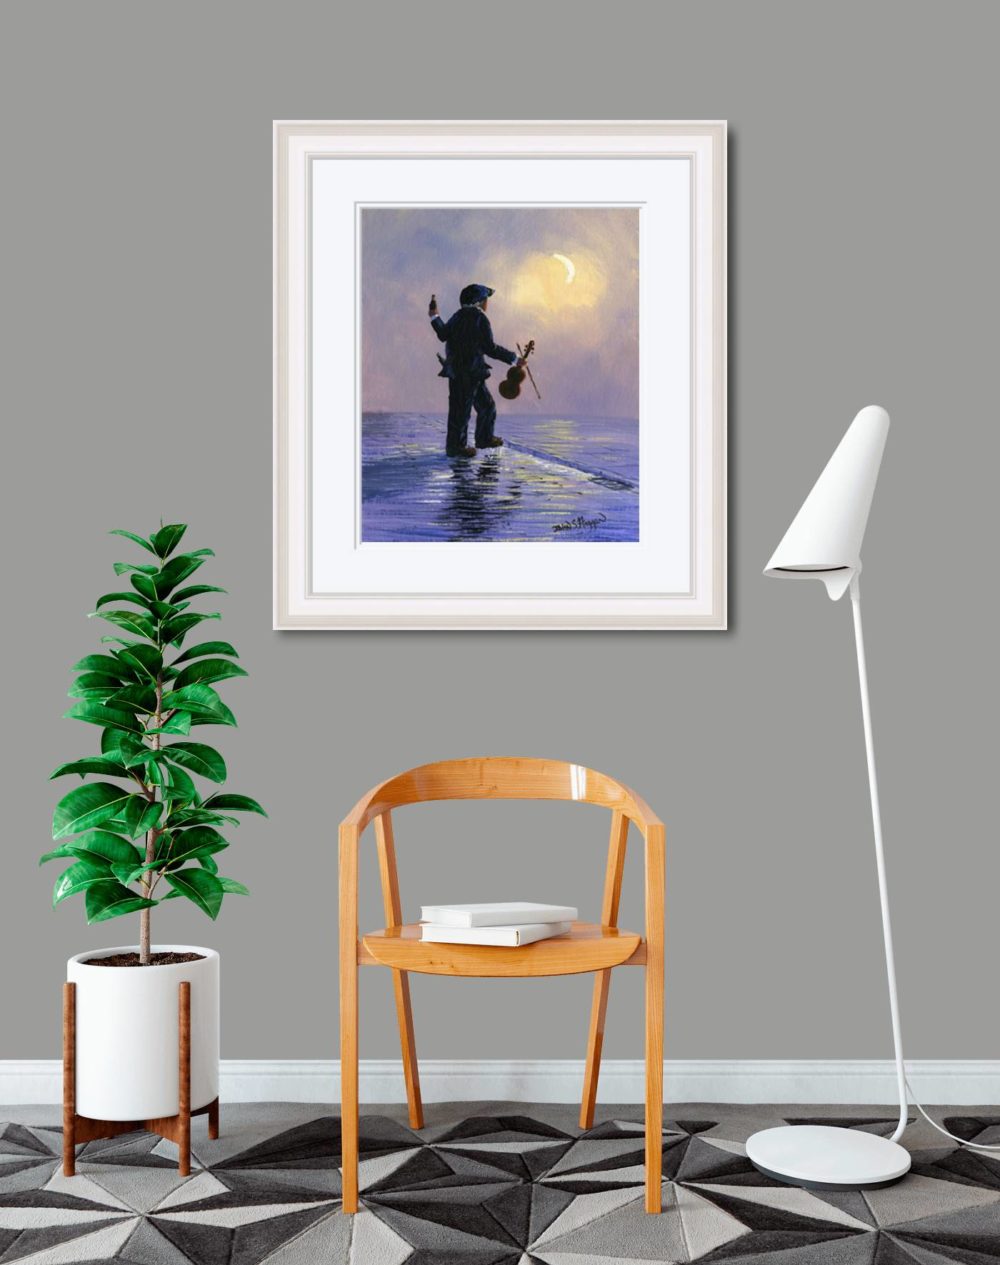 Howling By Moonlight Print (Large) In White Frame In Room